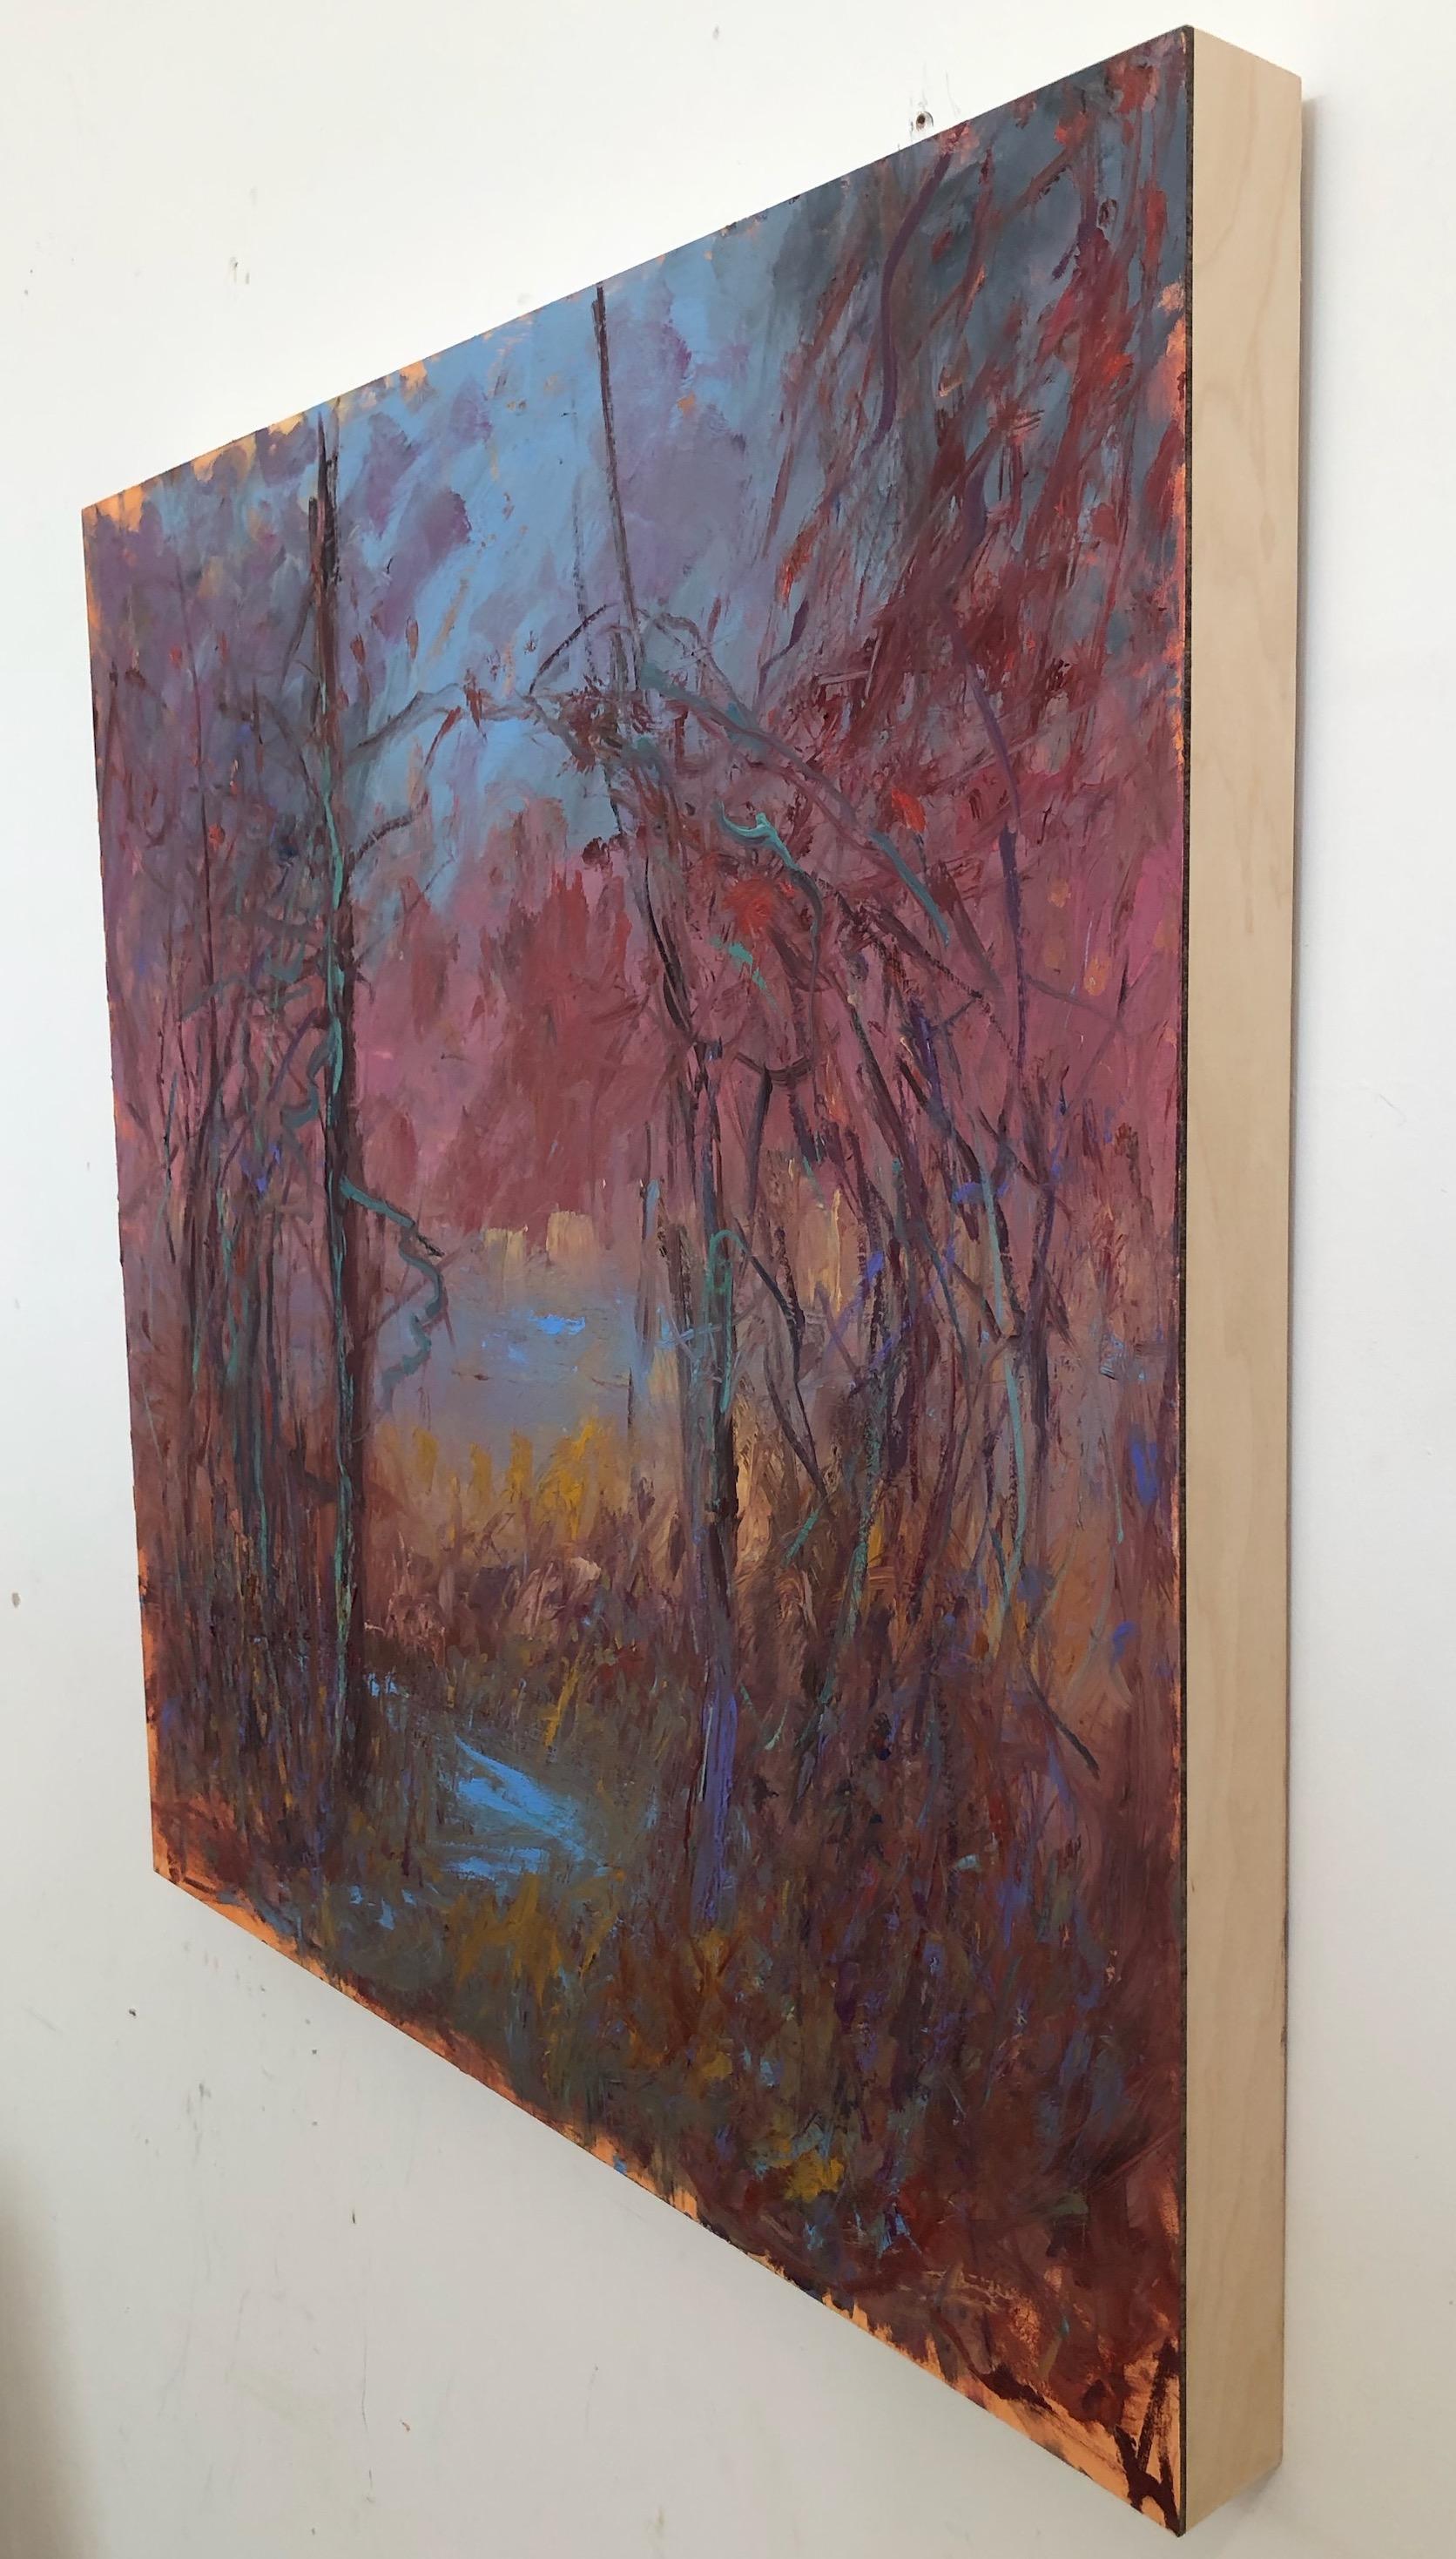 “Ingress” by Catherine Picard-Gibbs is a highly textural, expressionist oil painting, with a heightened color palette of pink, purple, blue, and yellow ochre, suggests the afterlife with darker trees and branches in the foreground creating a